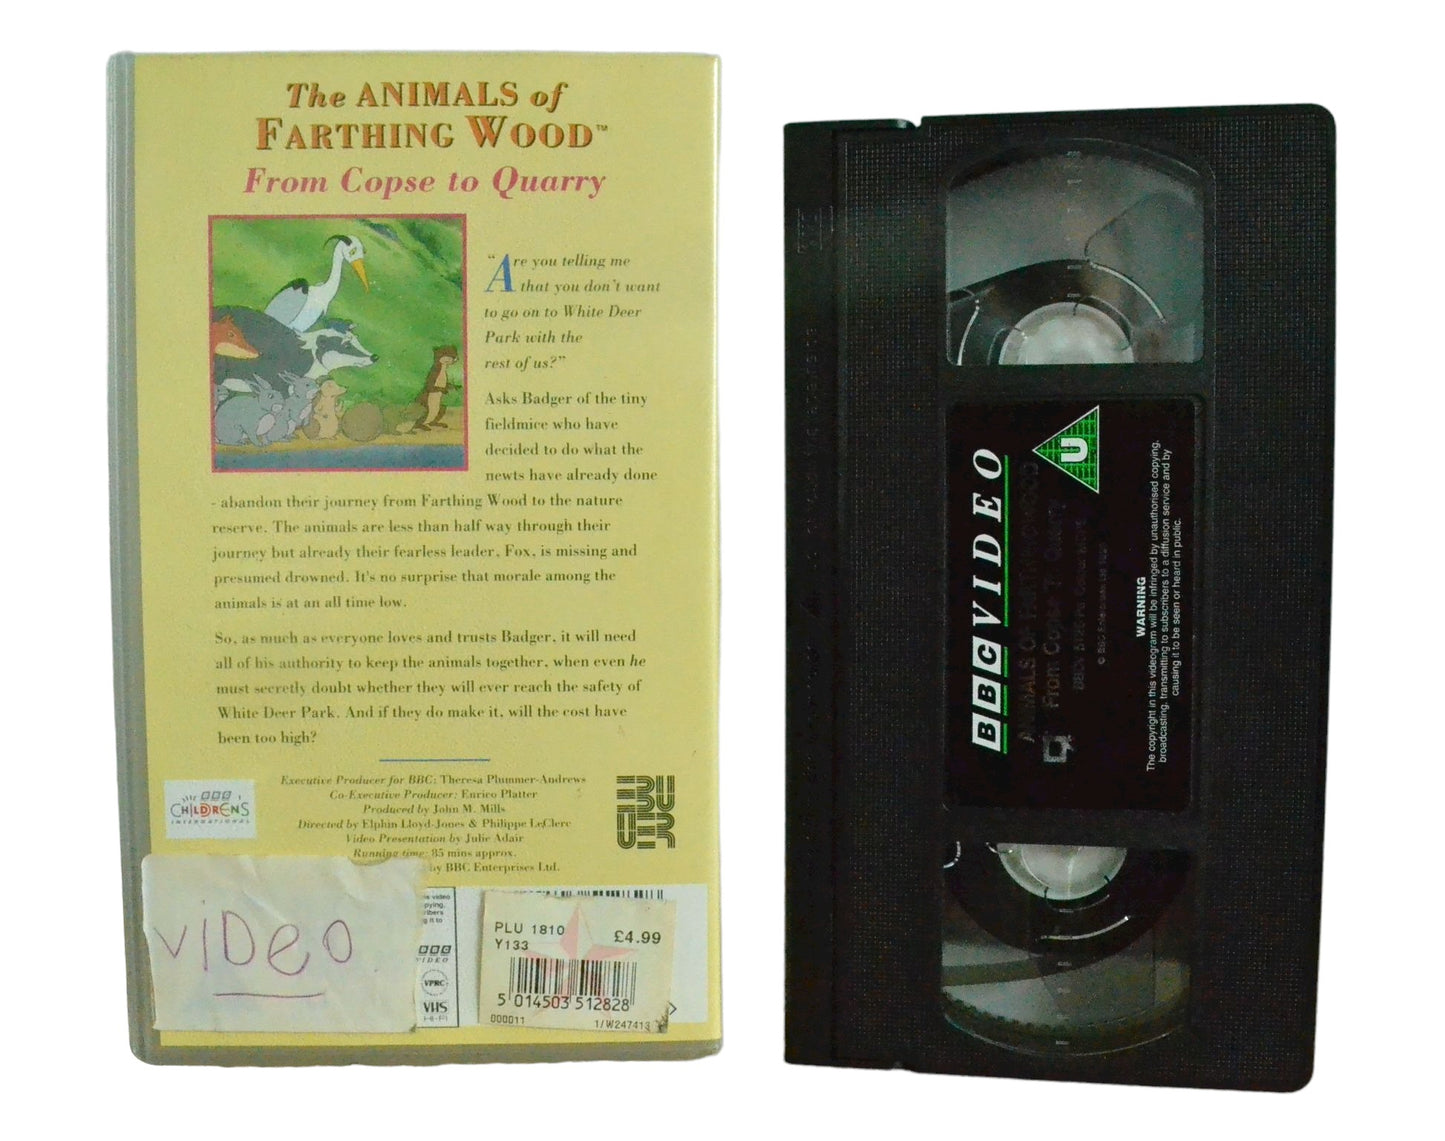 The Animals Of Farthing Wood From Copse To Quarry - BBC Video - Childrens - Pal VHS-